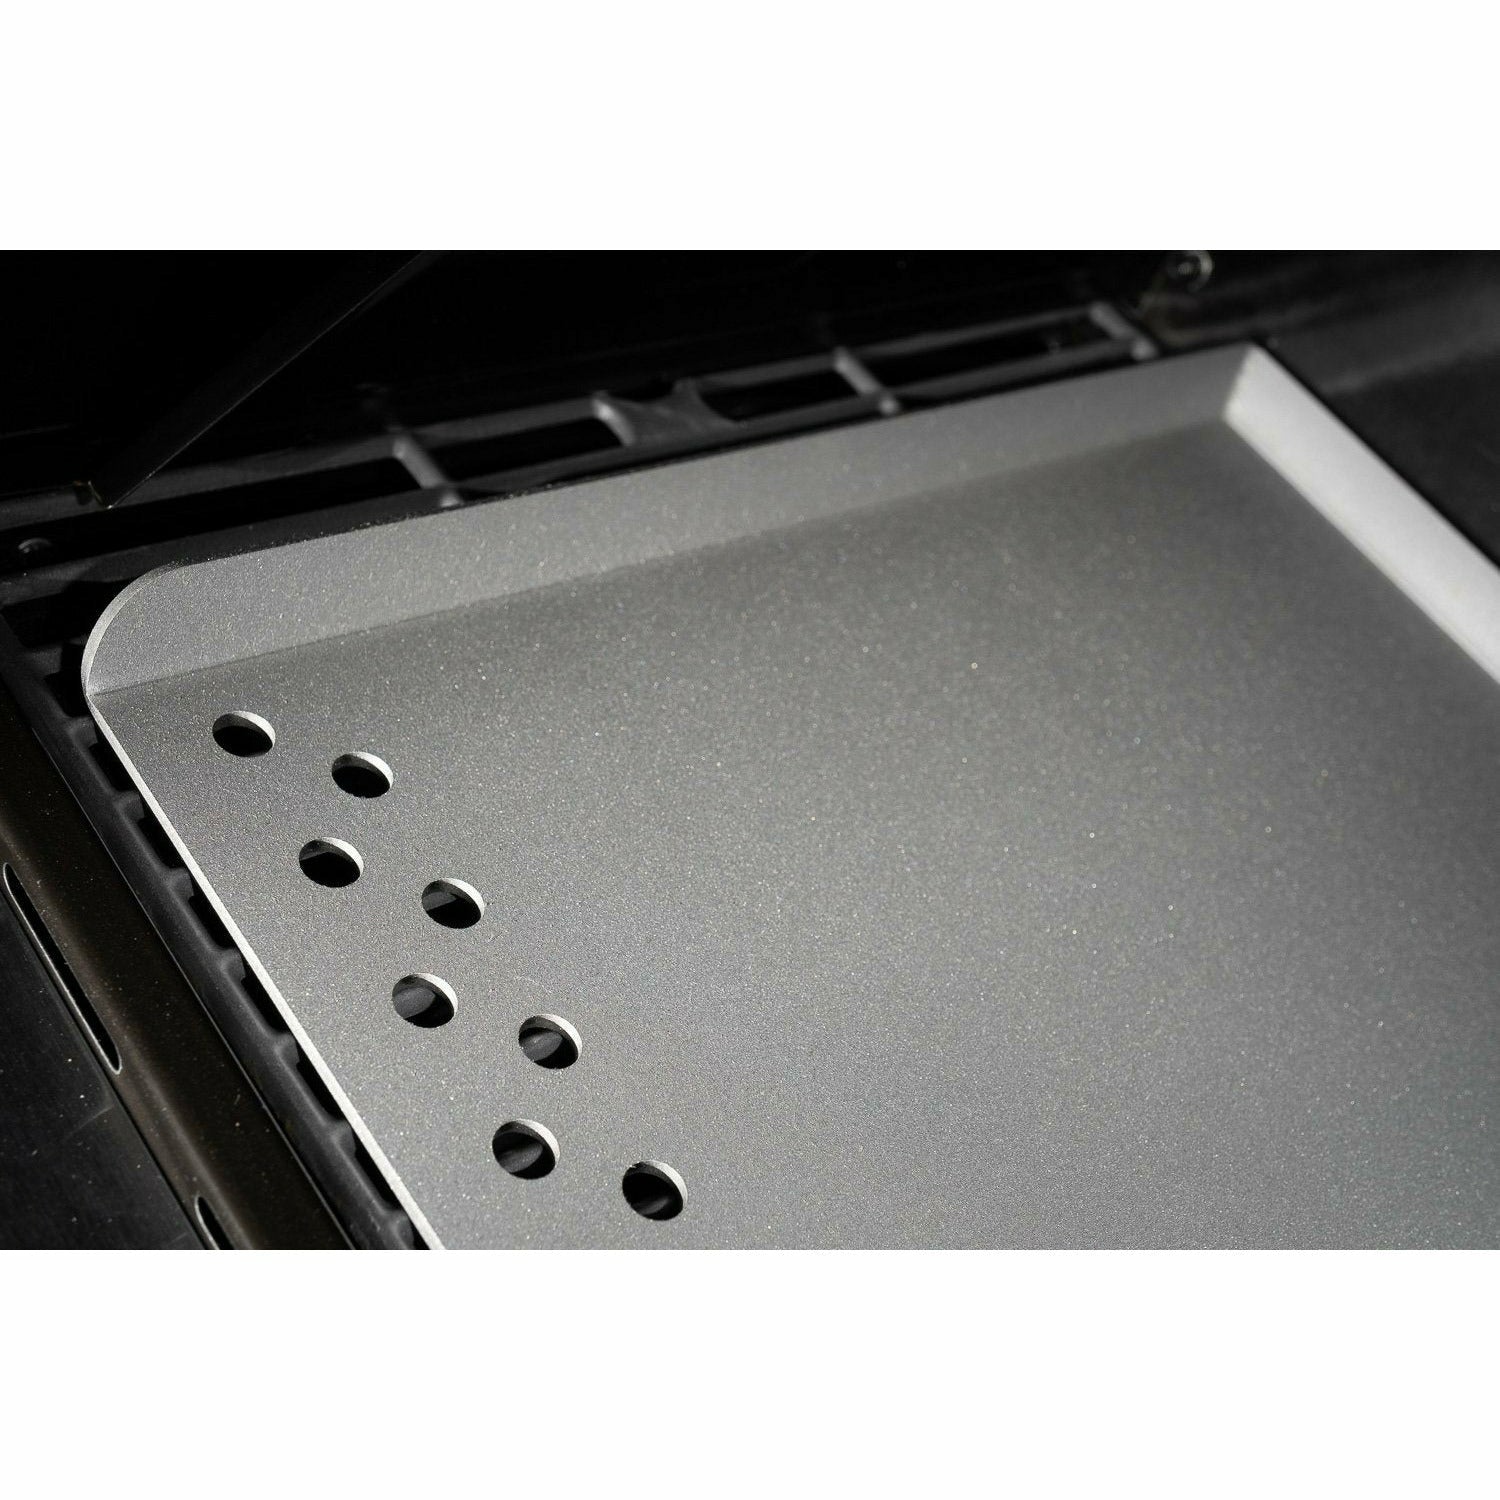 VEVOR 17 x 13 Stainless Steel Flat Top Griddle, Charcoal/Gas Grill with 2  Handles, Drain Hole 